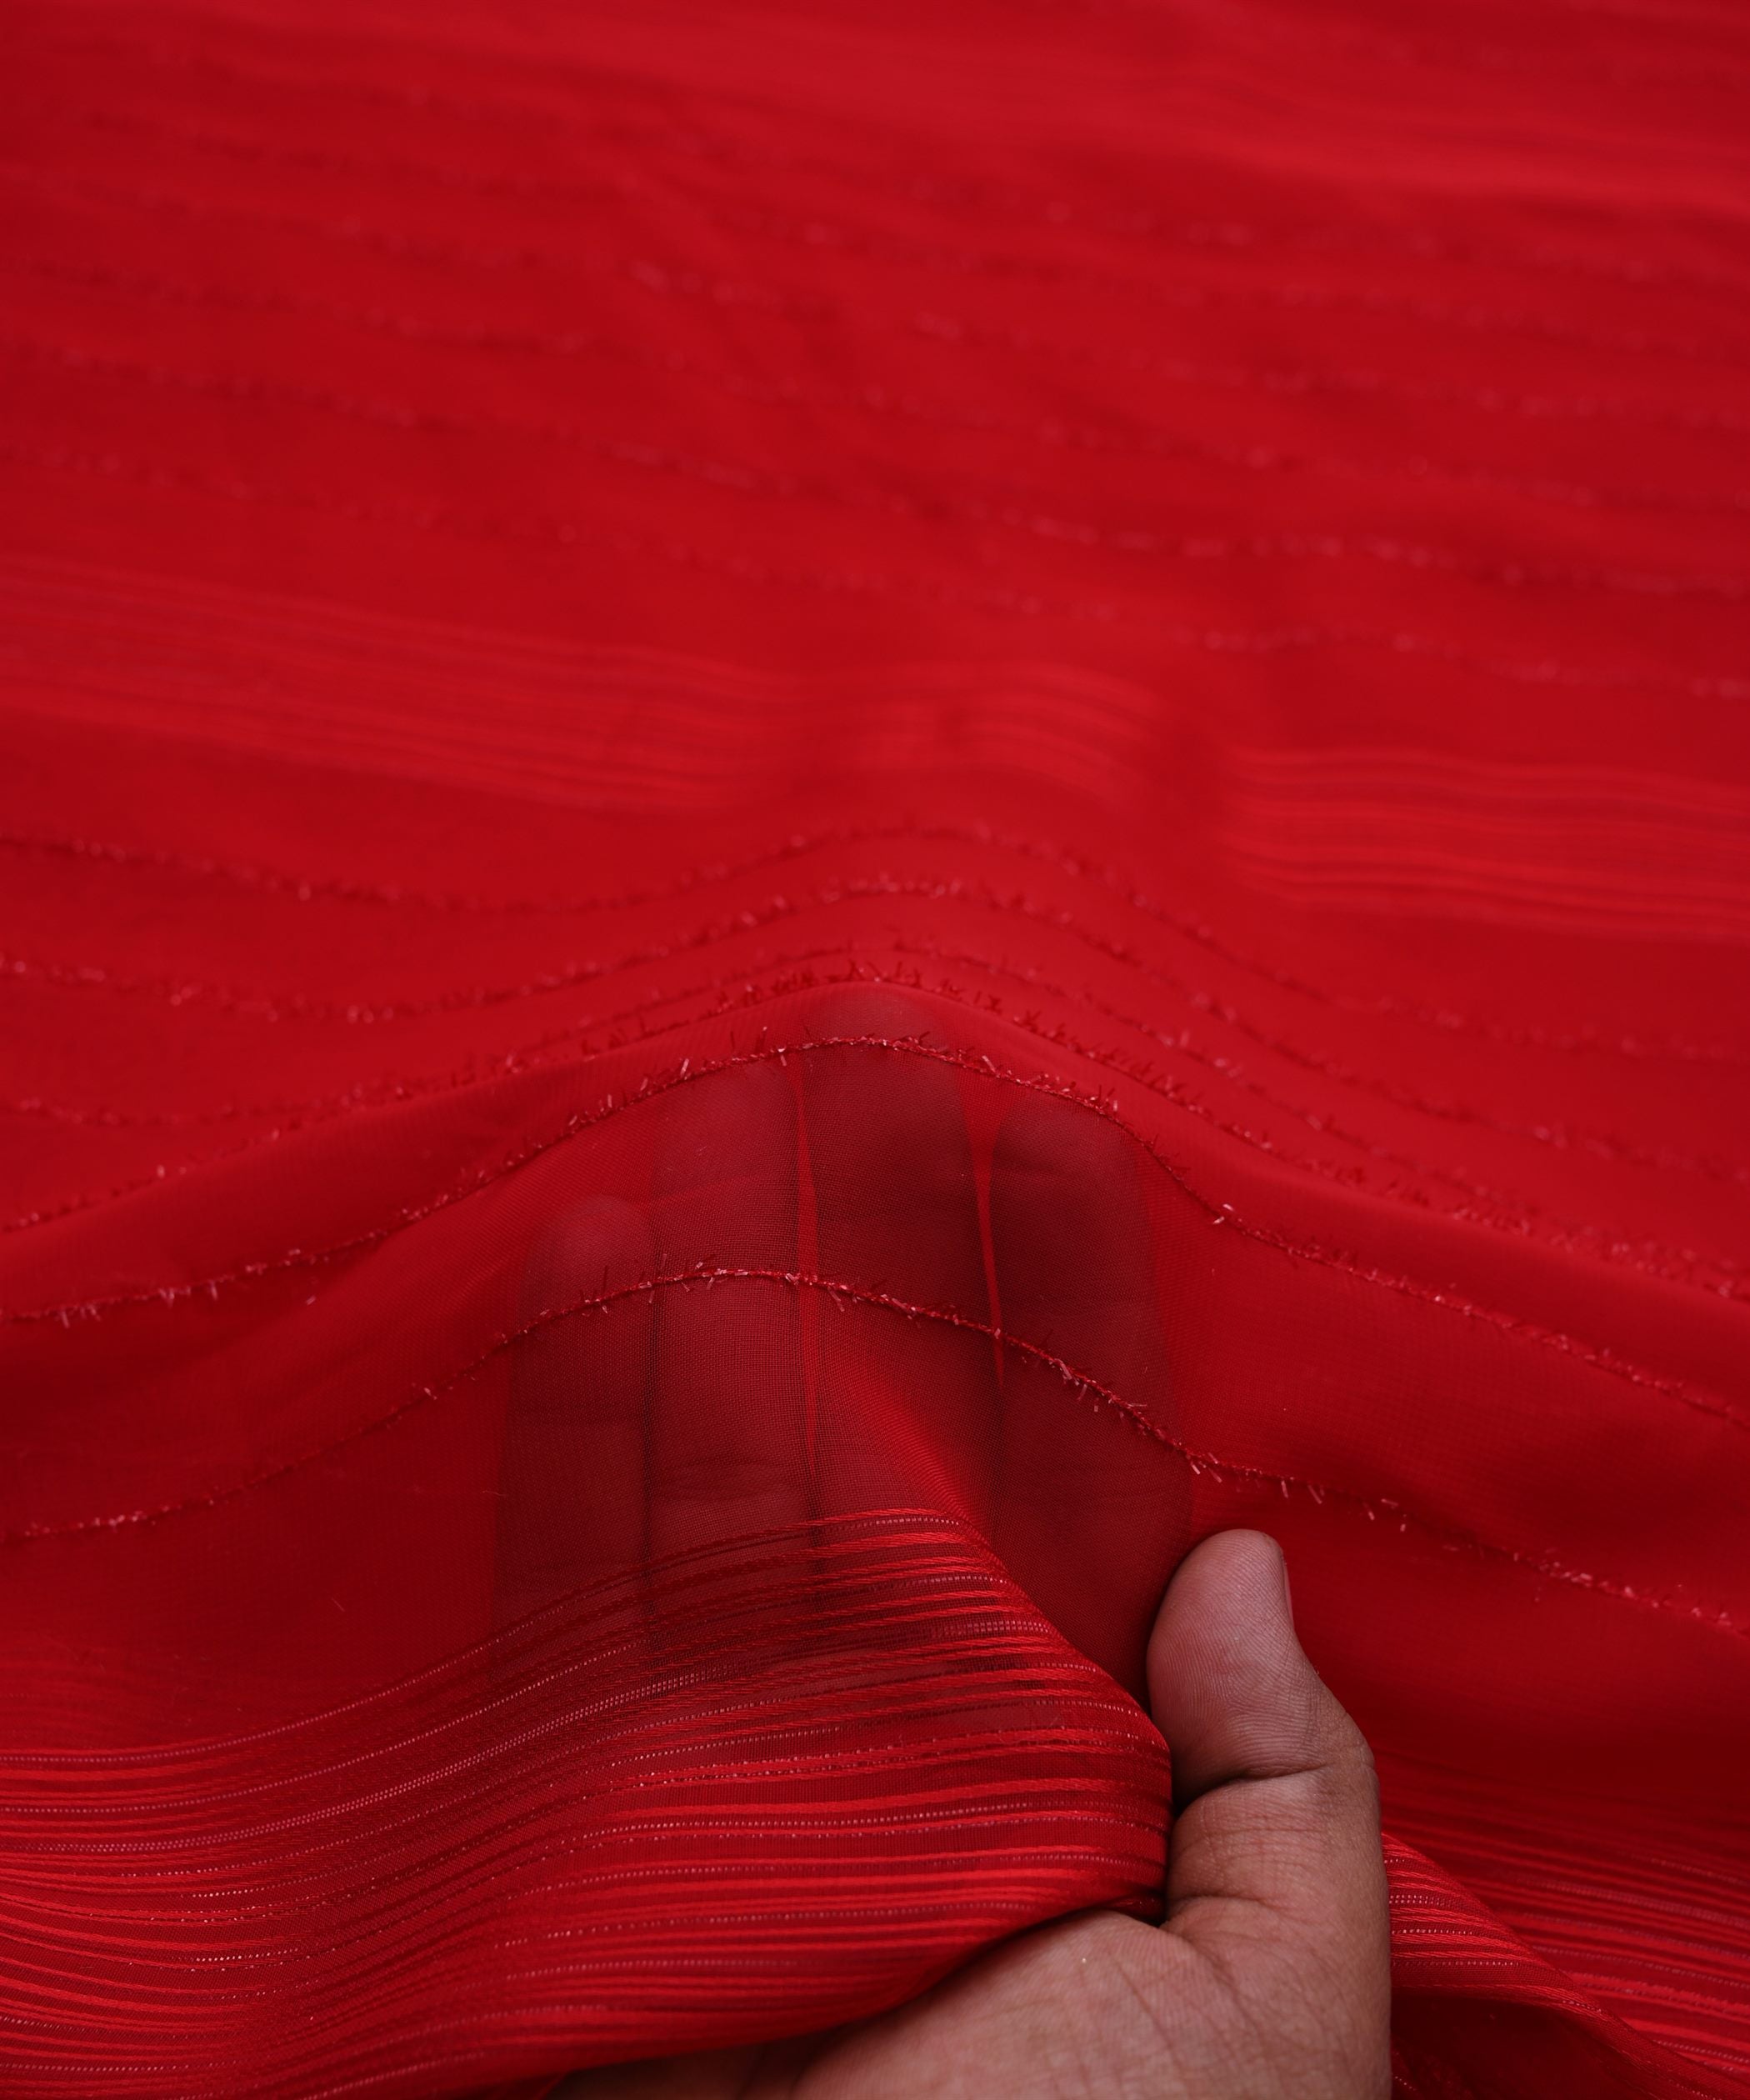 Red Georgette Fabric with Satin and Fur Stripes